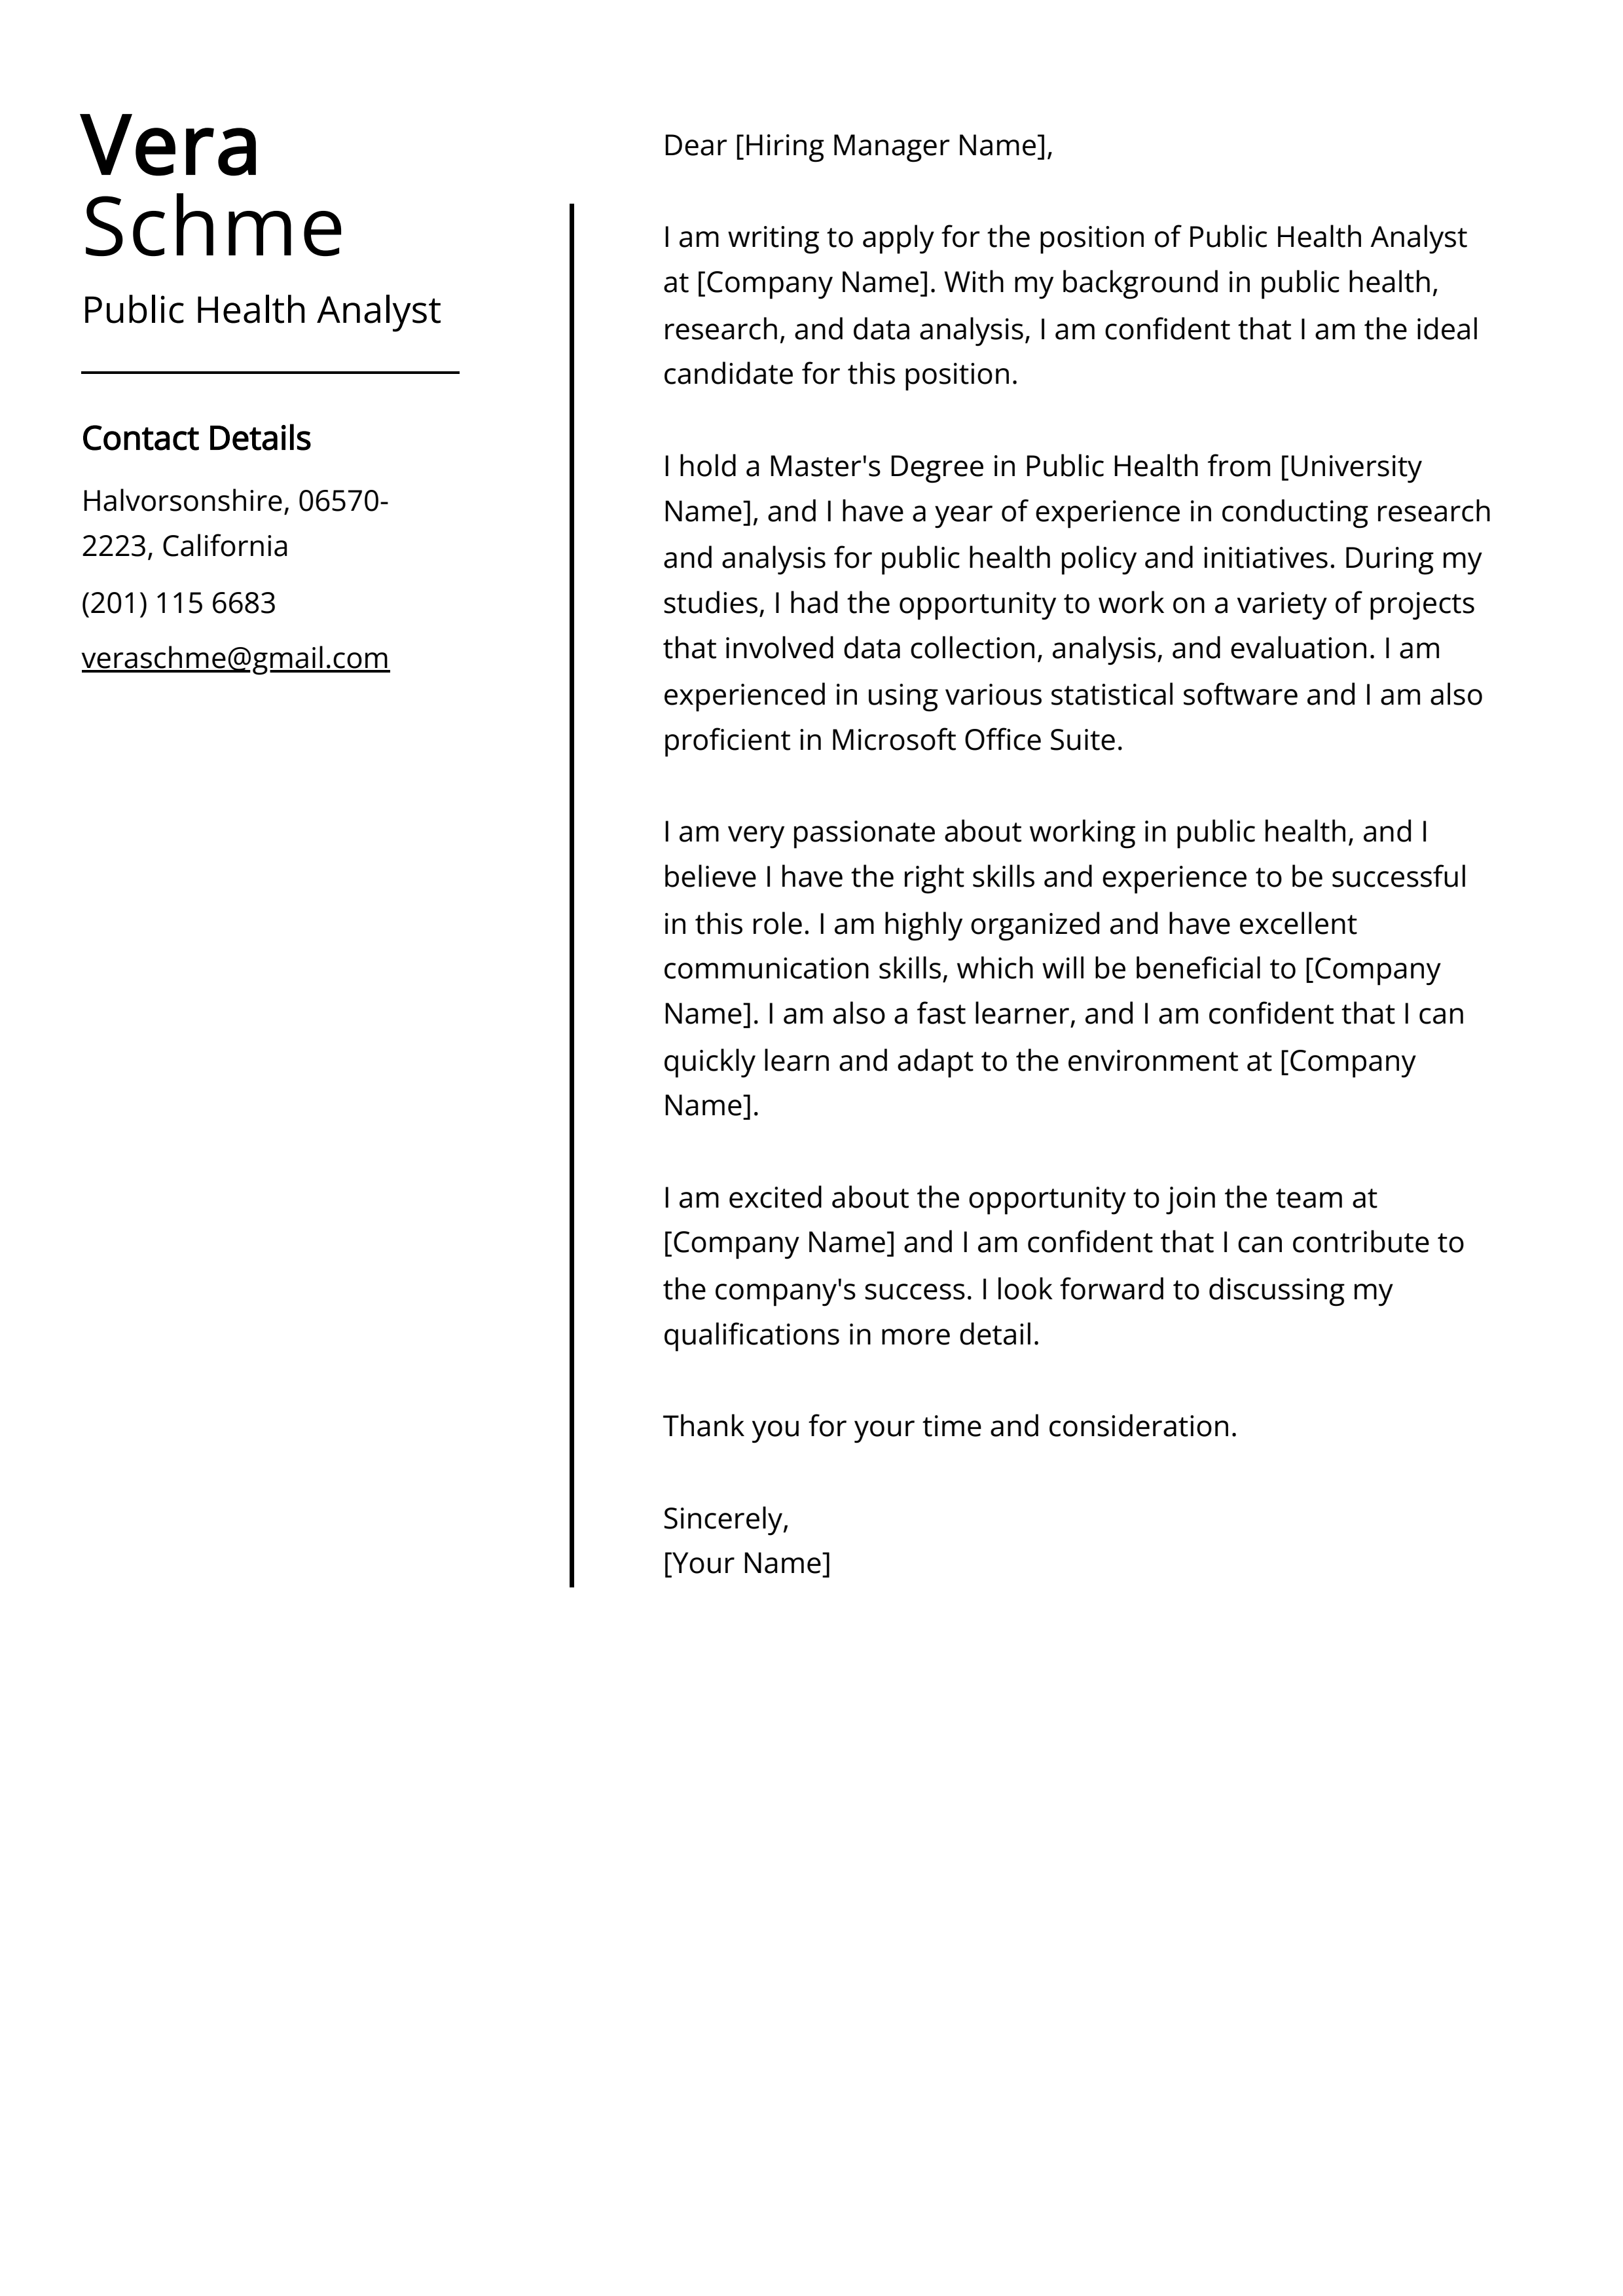 Public Health Analyst Cover Letter Example